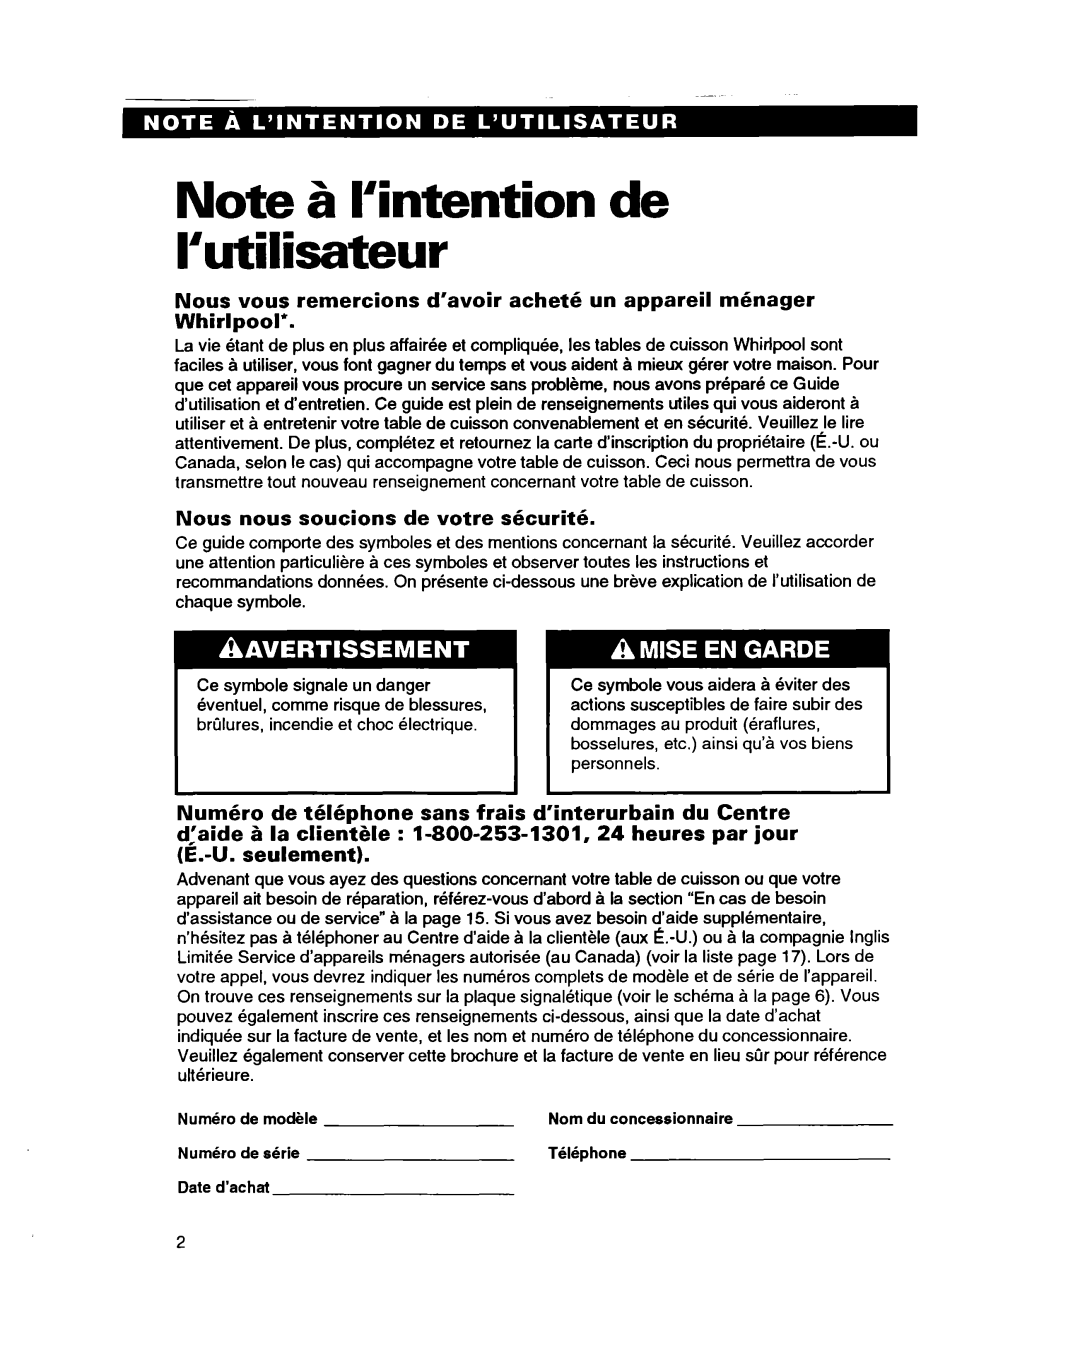 Whirlpool RC864OXB important safety instructions Note 6 l’intention de I’utilisateur 